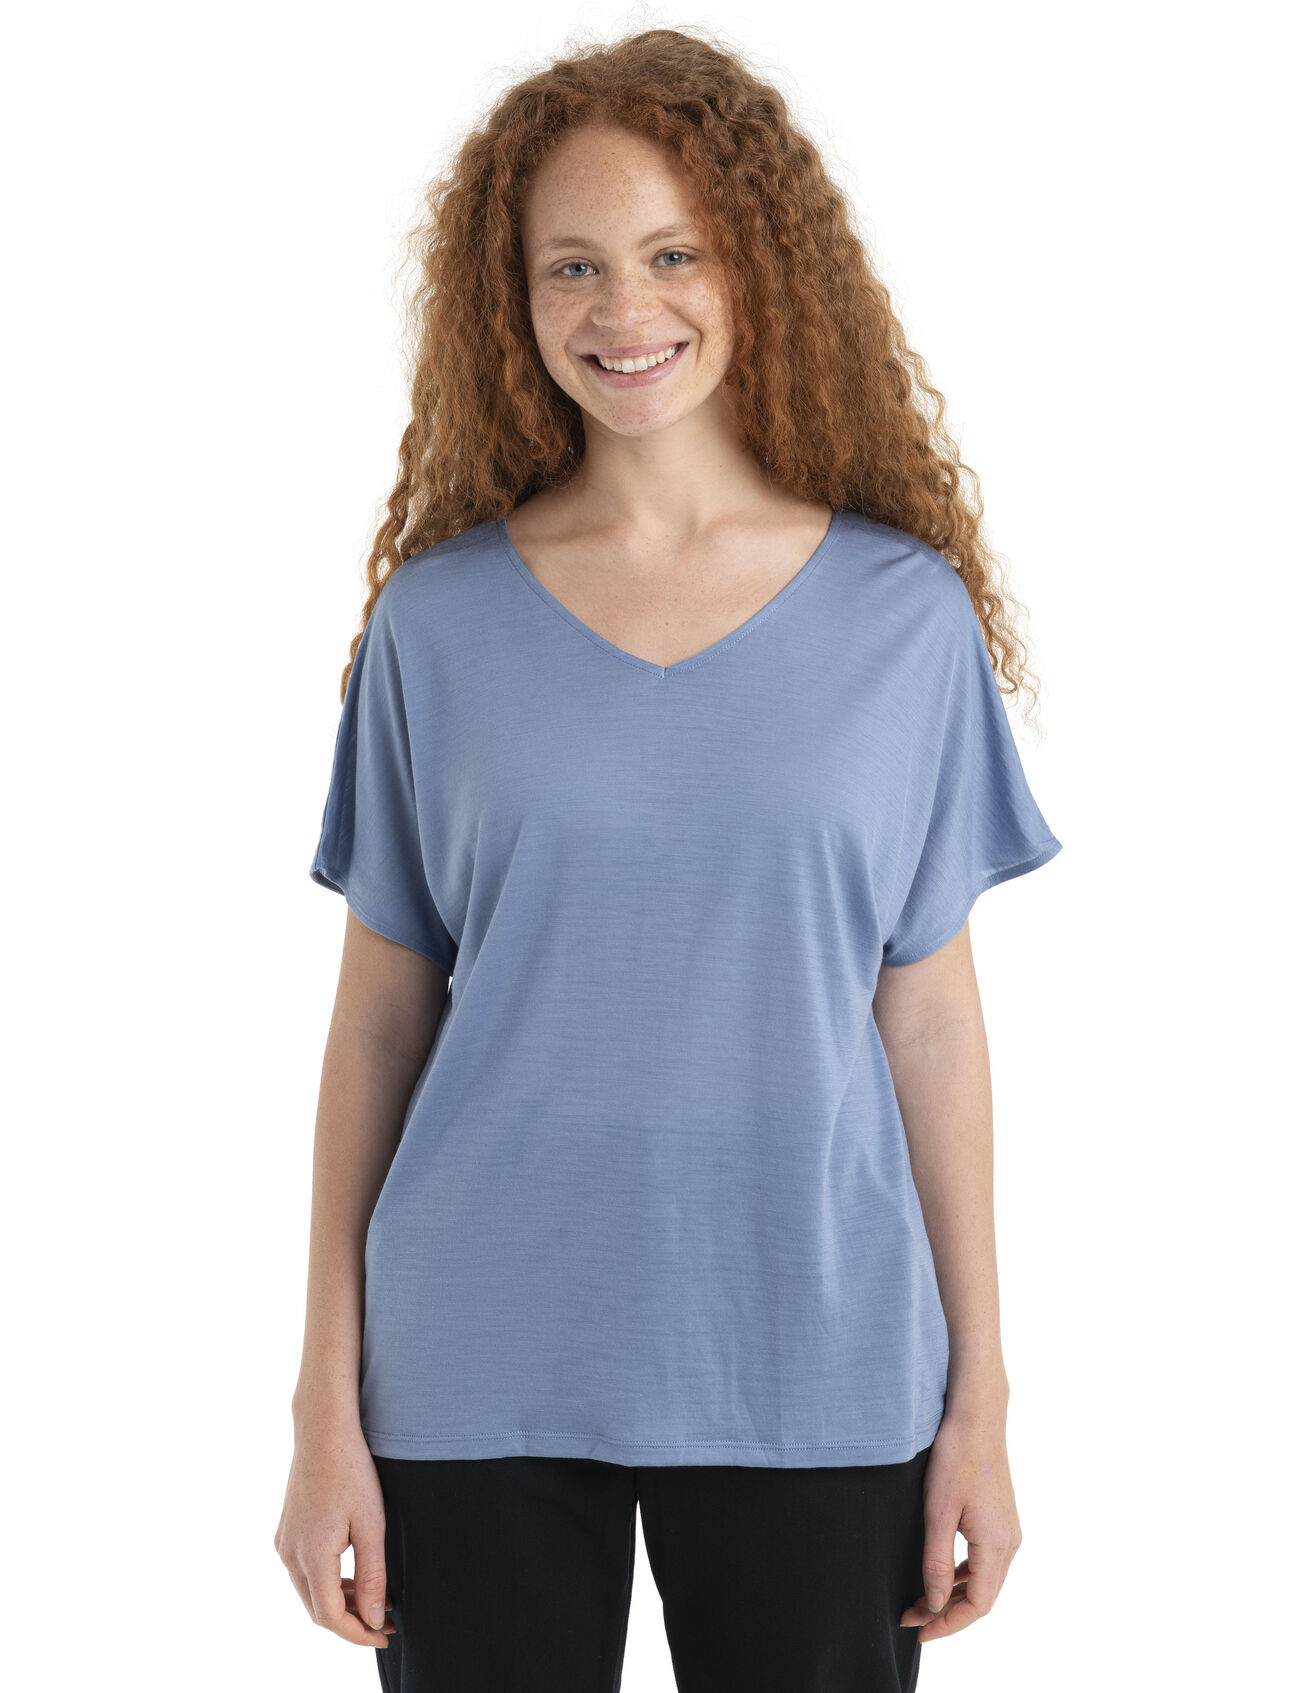 Womens Merino Drayden Reversible Short Sleeve Top A versatile everyday shirt featuring our Cool-Lite™ jersey fabric, the Drayden Reversible Short Sleeve Top can be worn frontwards for a soft V neck, or backwards for a high crew neck.